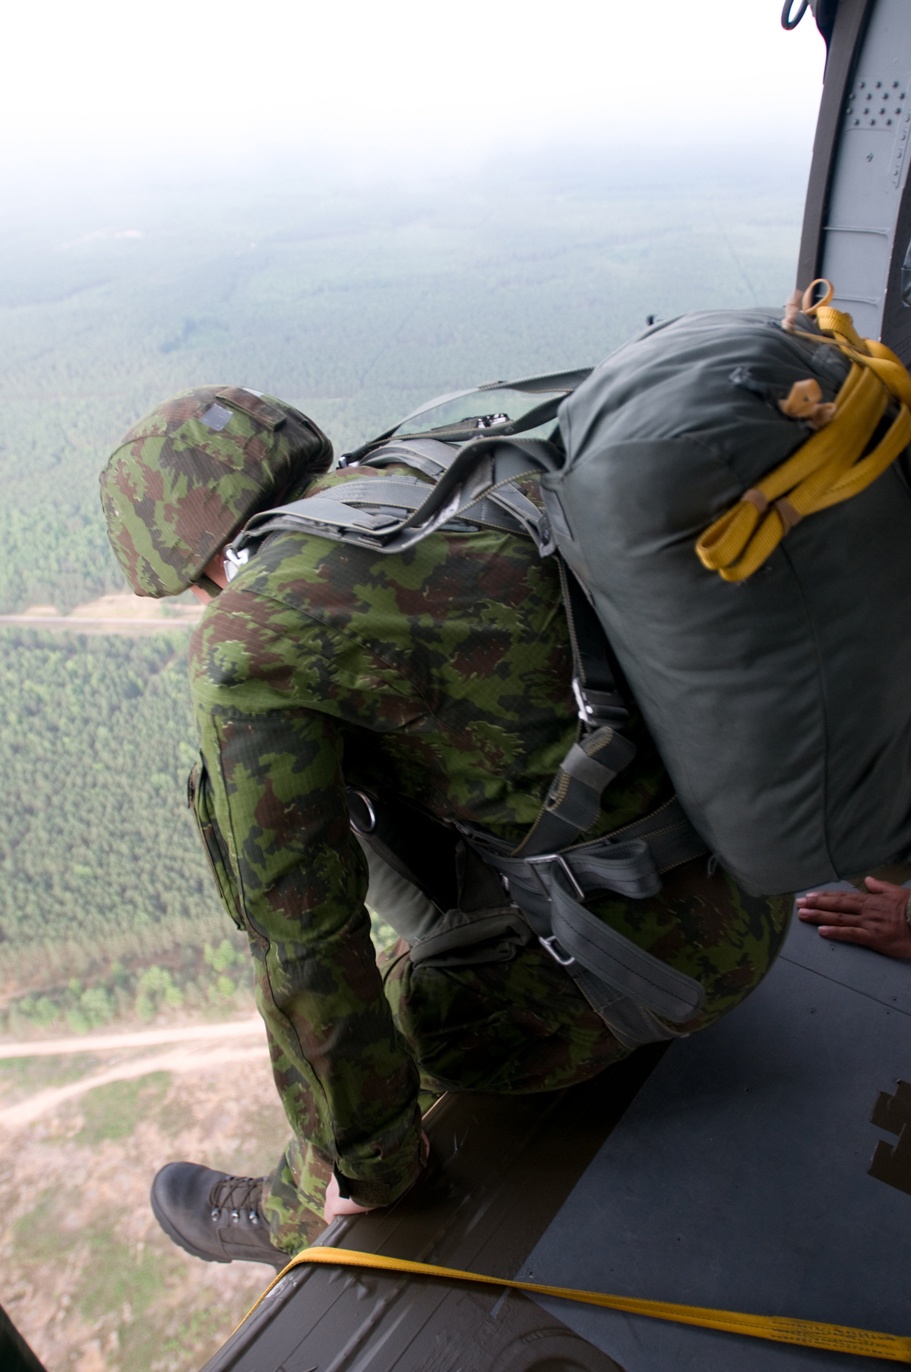 NATO paratroopers jump in Lithuania